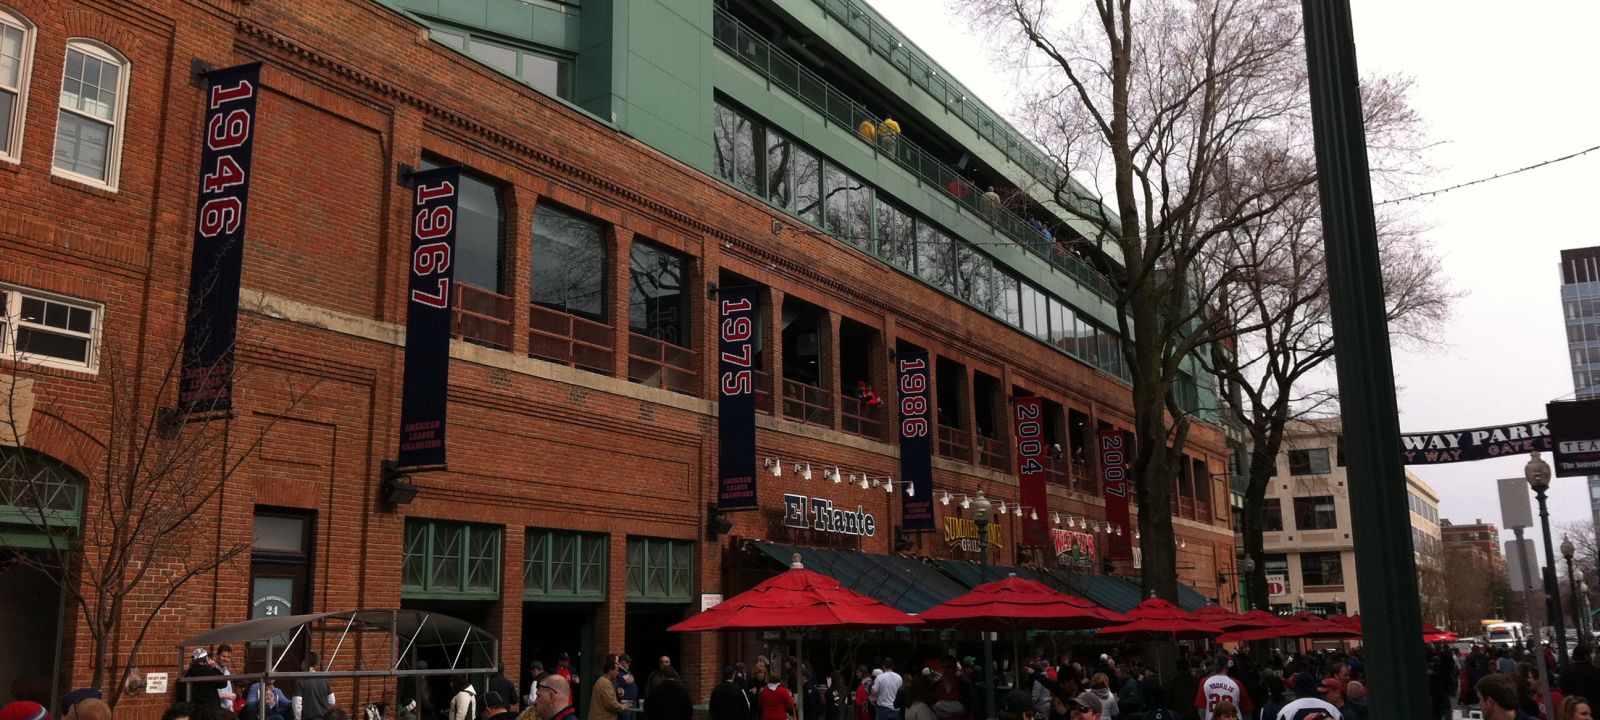 Outside Fenway Park, near The Colonnade Hotel